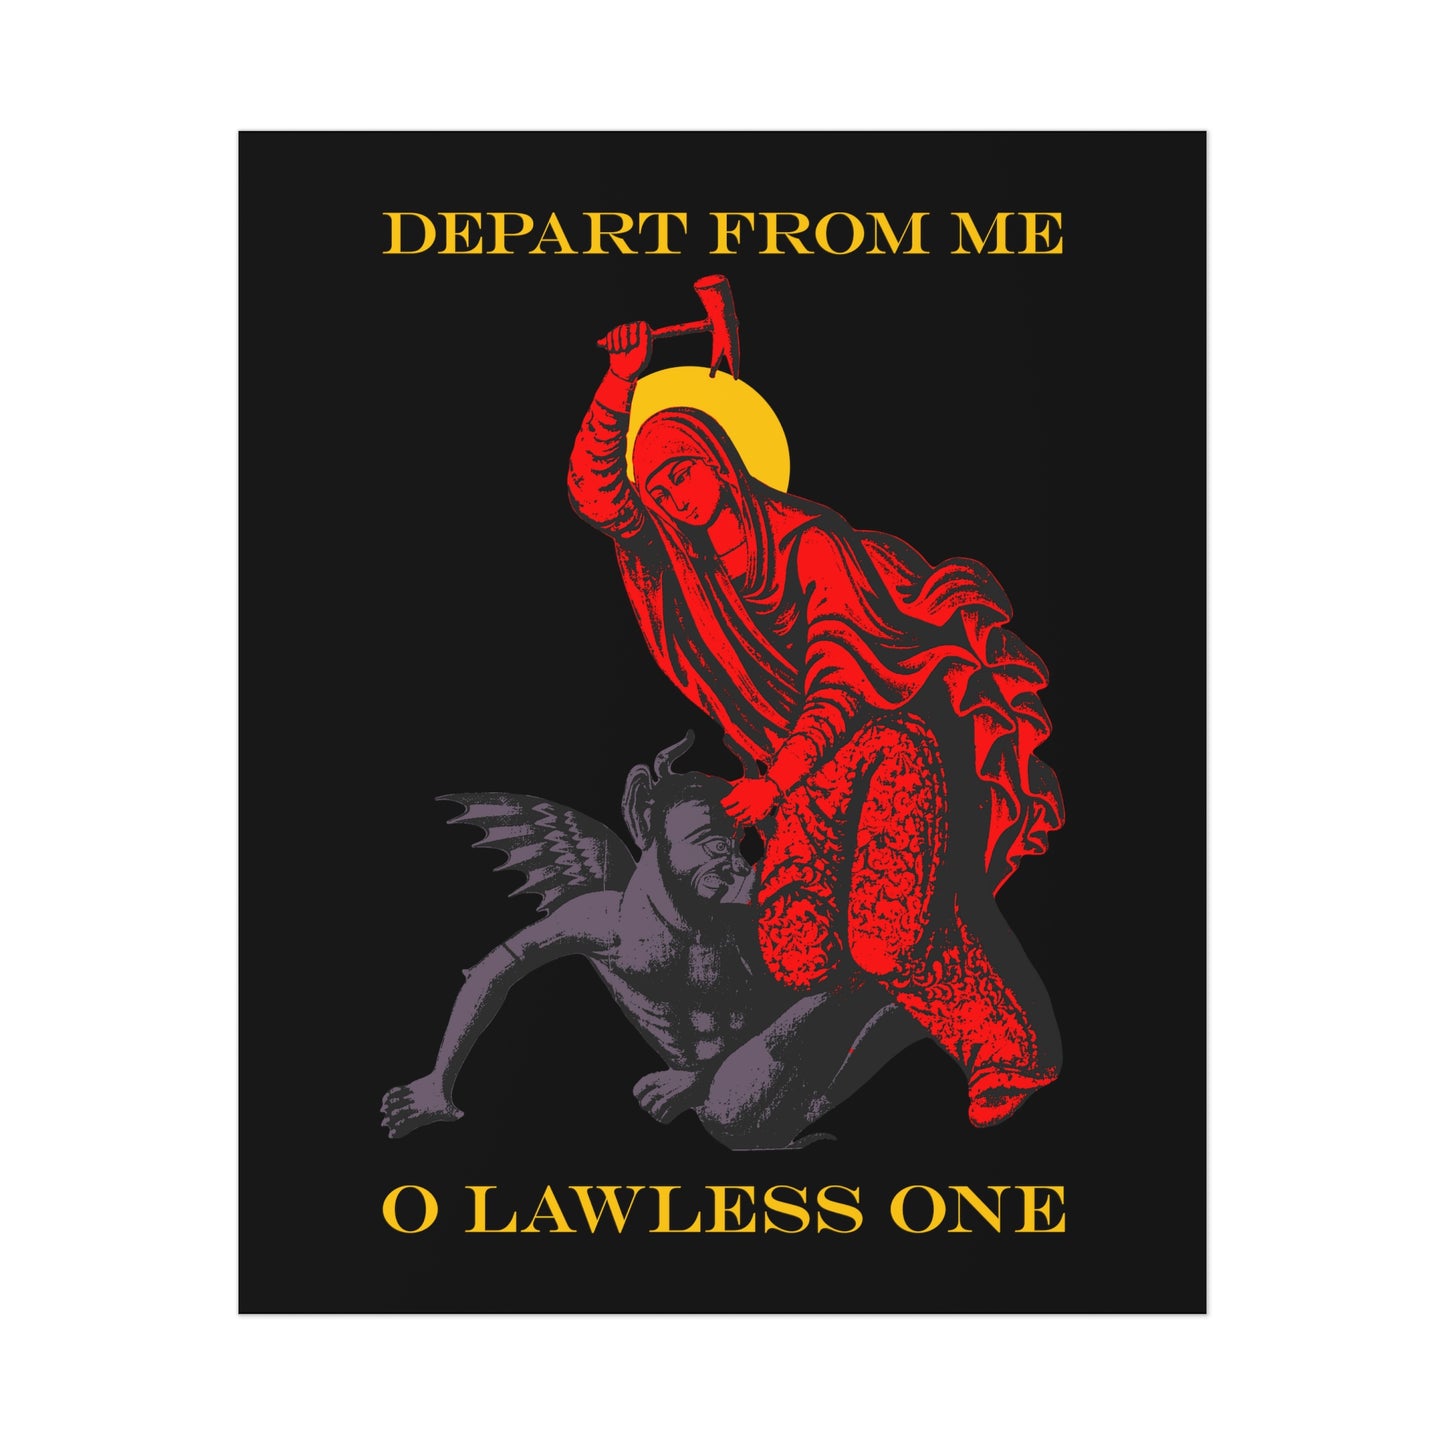 St Marina IconoGraphic (Depart from Me O Lawless One) No. 1 | Orthodox Christian Art Poster